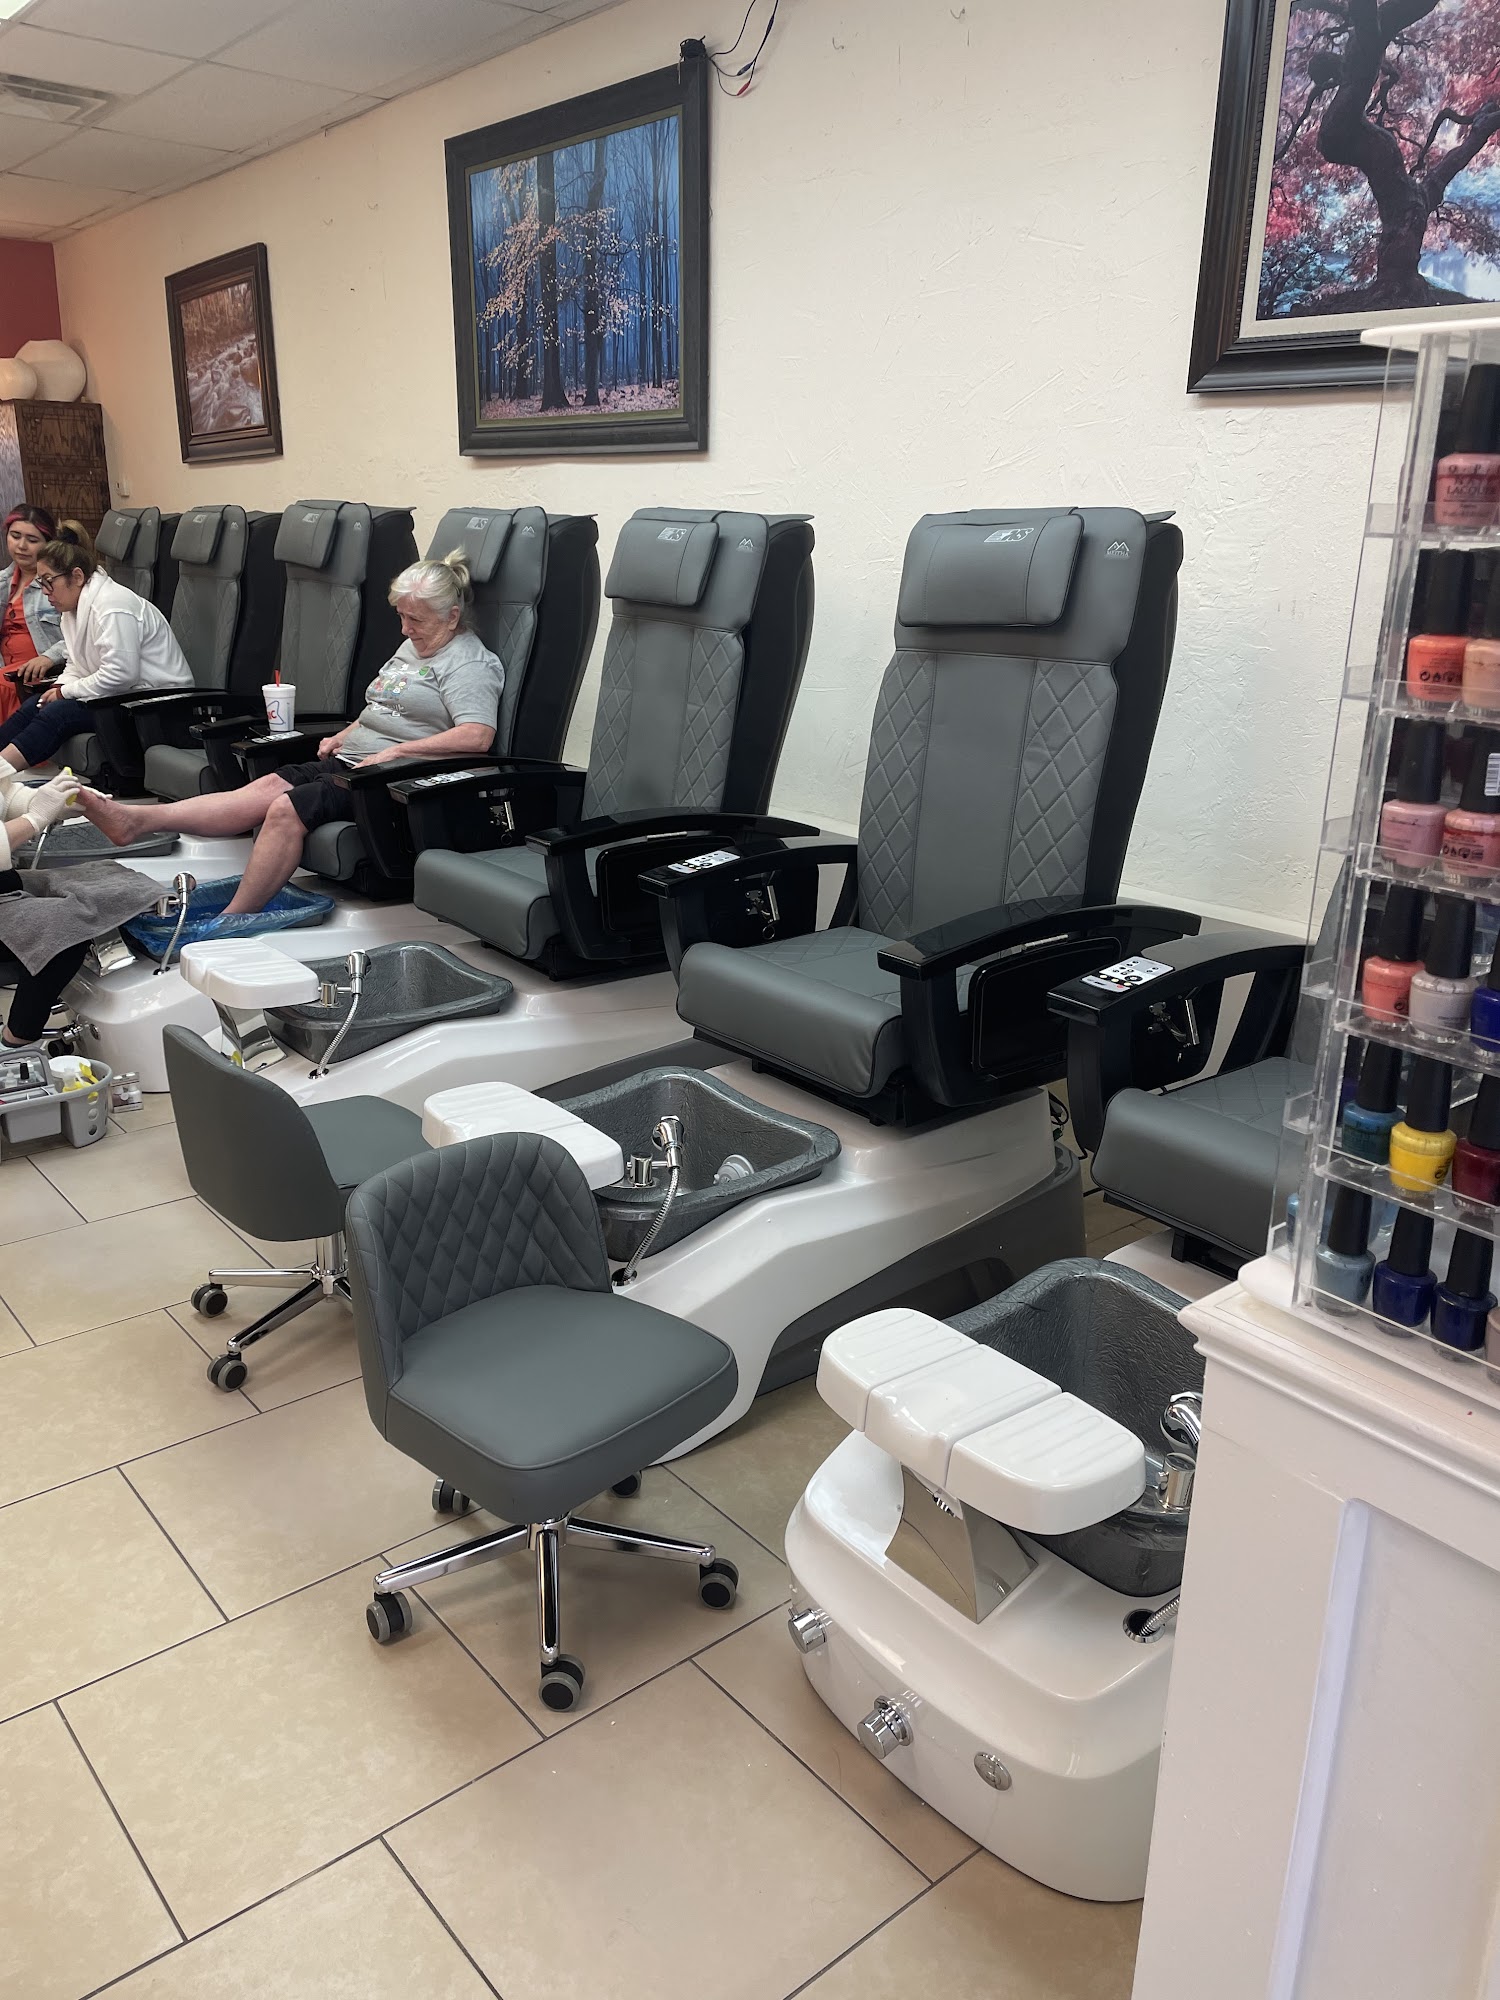 Chapel Hill Nails ( New Management) 4640 Nashville Hwy, Chapel Hill Tennessee 37034